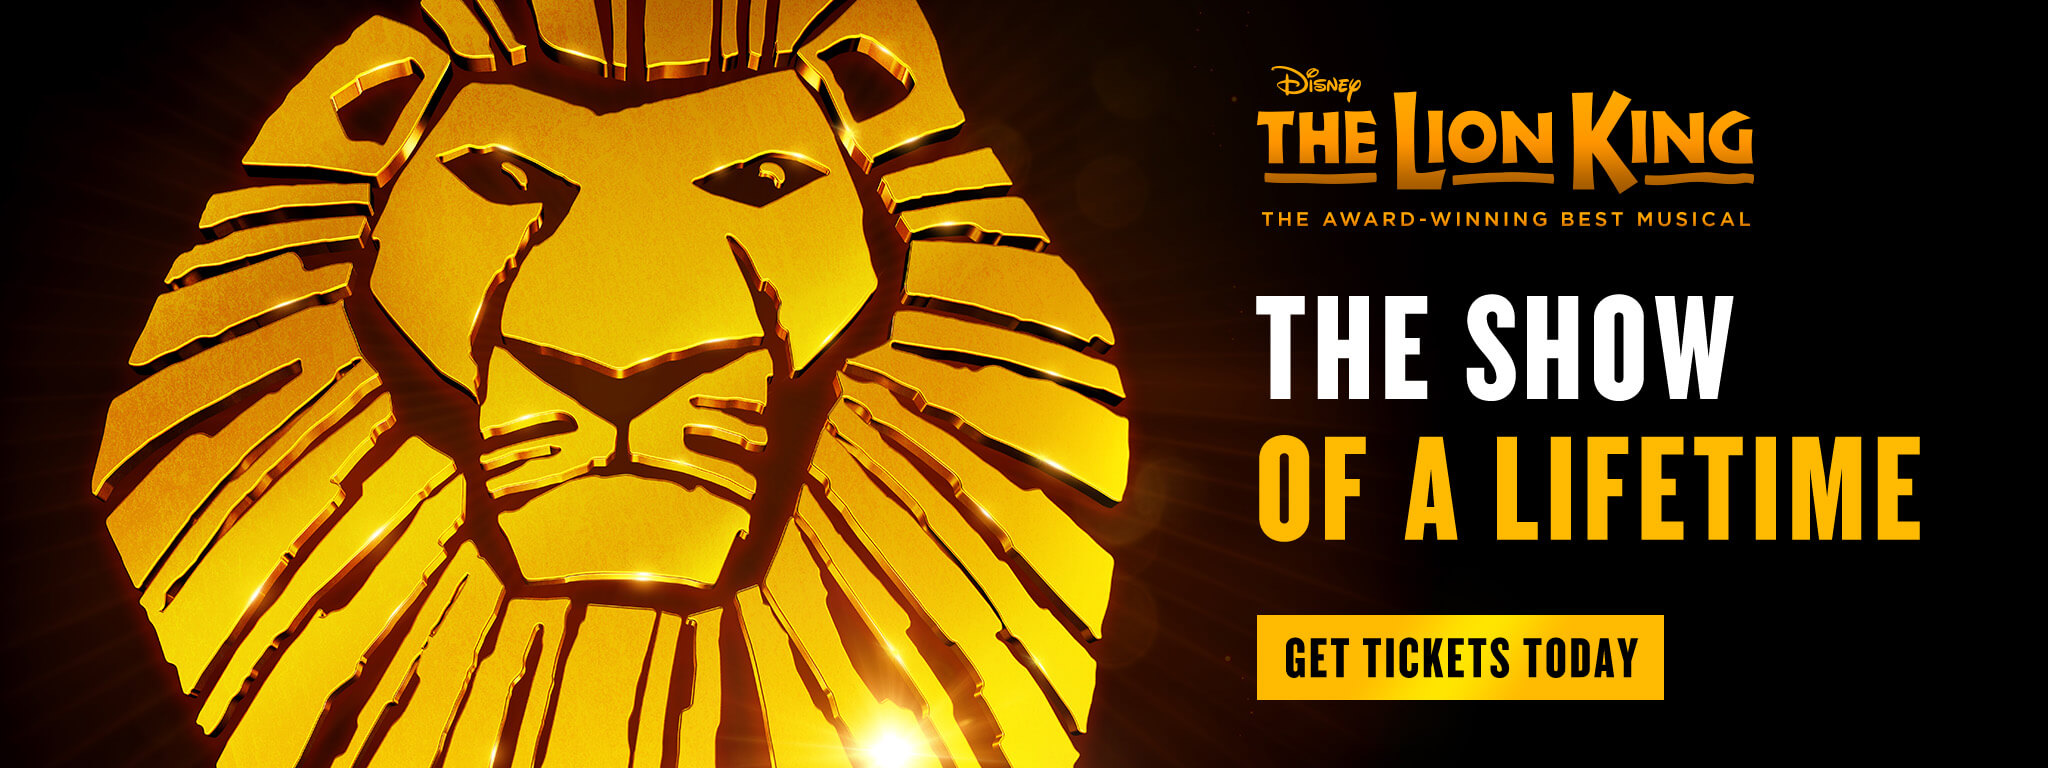 Disney THE LION KING - The Show of a Lifetime - GET TICKETS TODAY